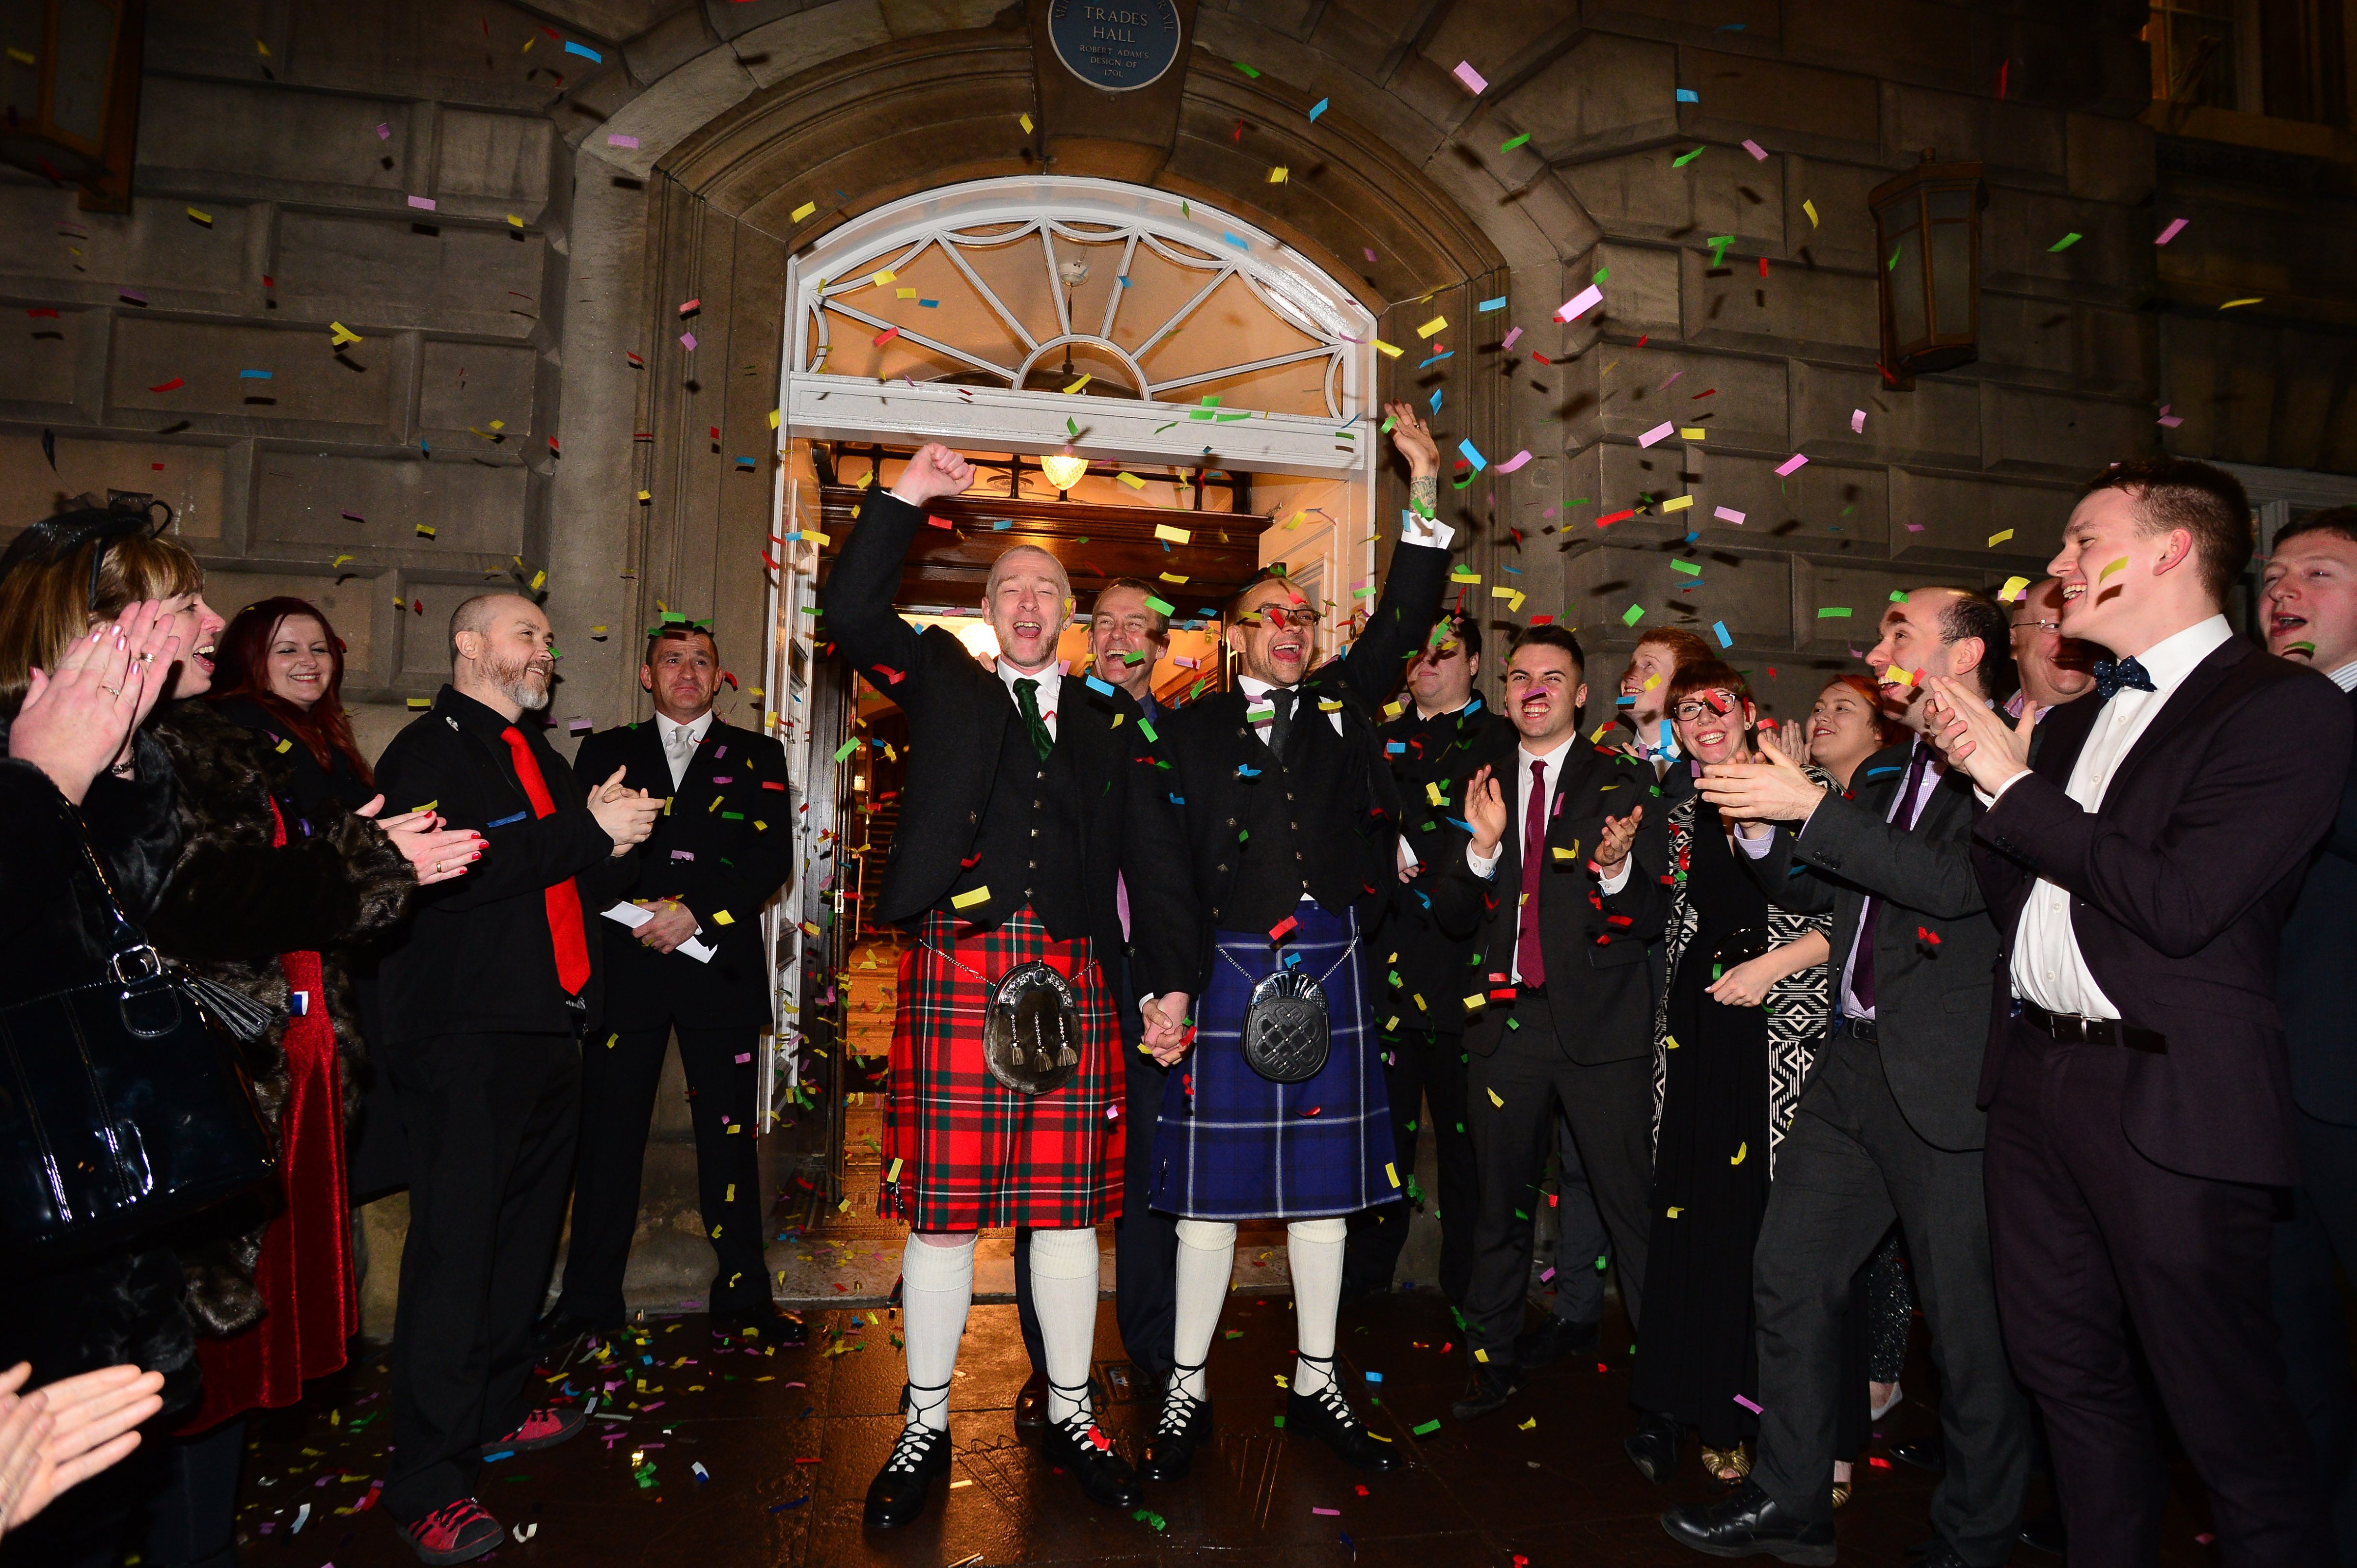 A same-sex couple Joe Schofield (blue kilt) and Malcolm Brown from Tullibody, Clackmannanshire are married shortly after midnight in front of friends and family in one of the first same-sex and belief category weddings in Scotland on Dec. 31, 2014 in Glasgow, Scotland. (Mark Runnacles—Getty Images)